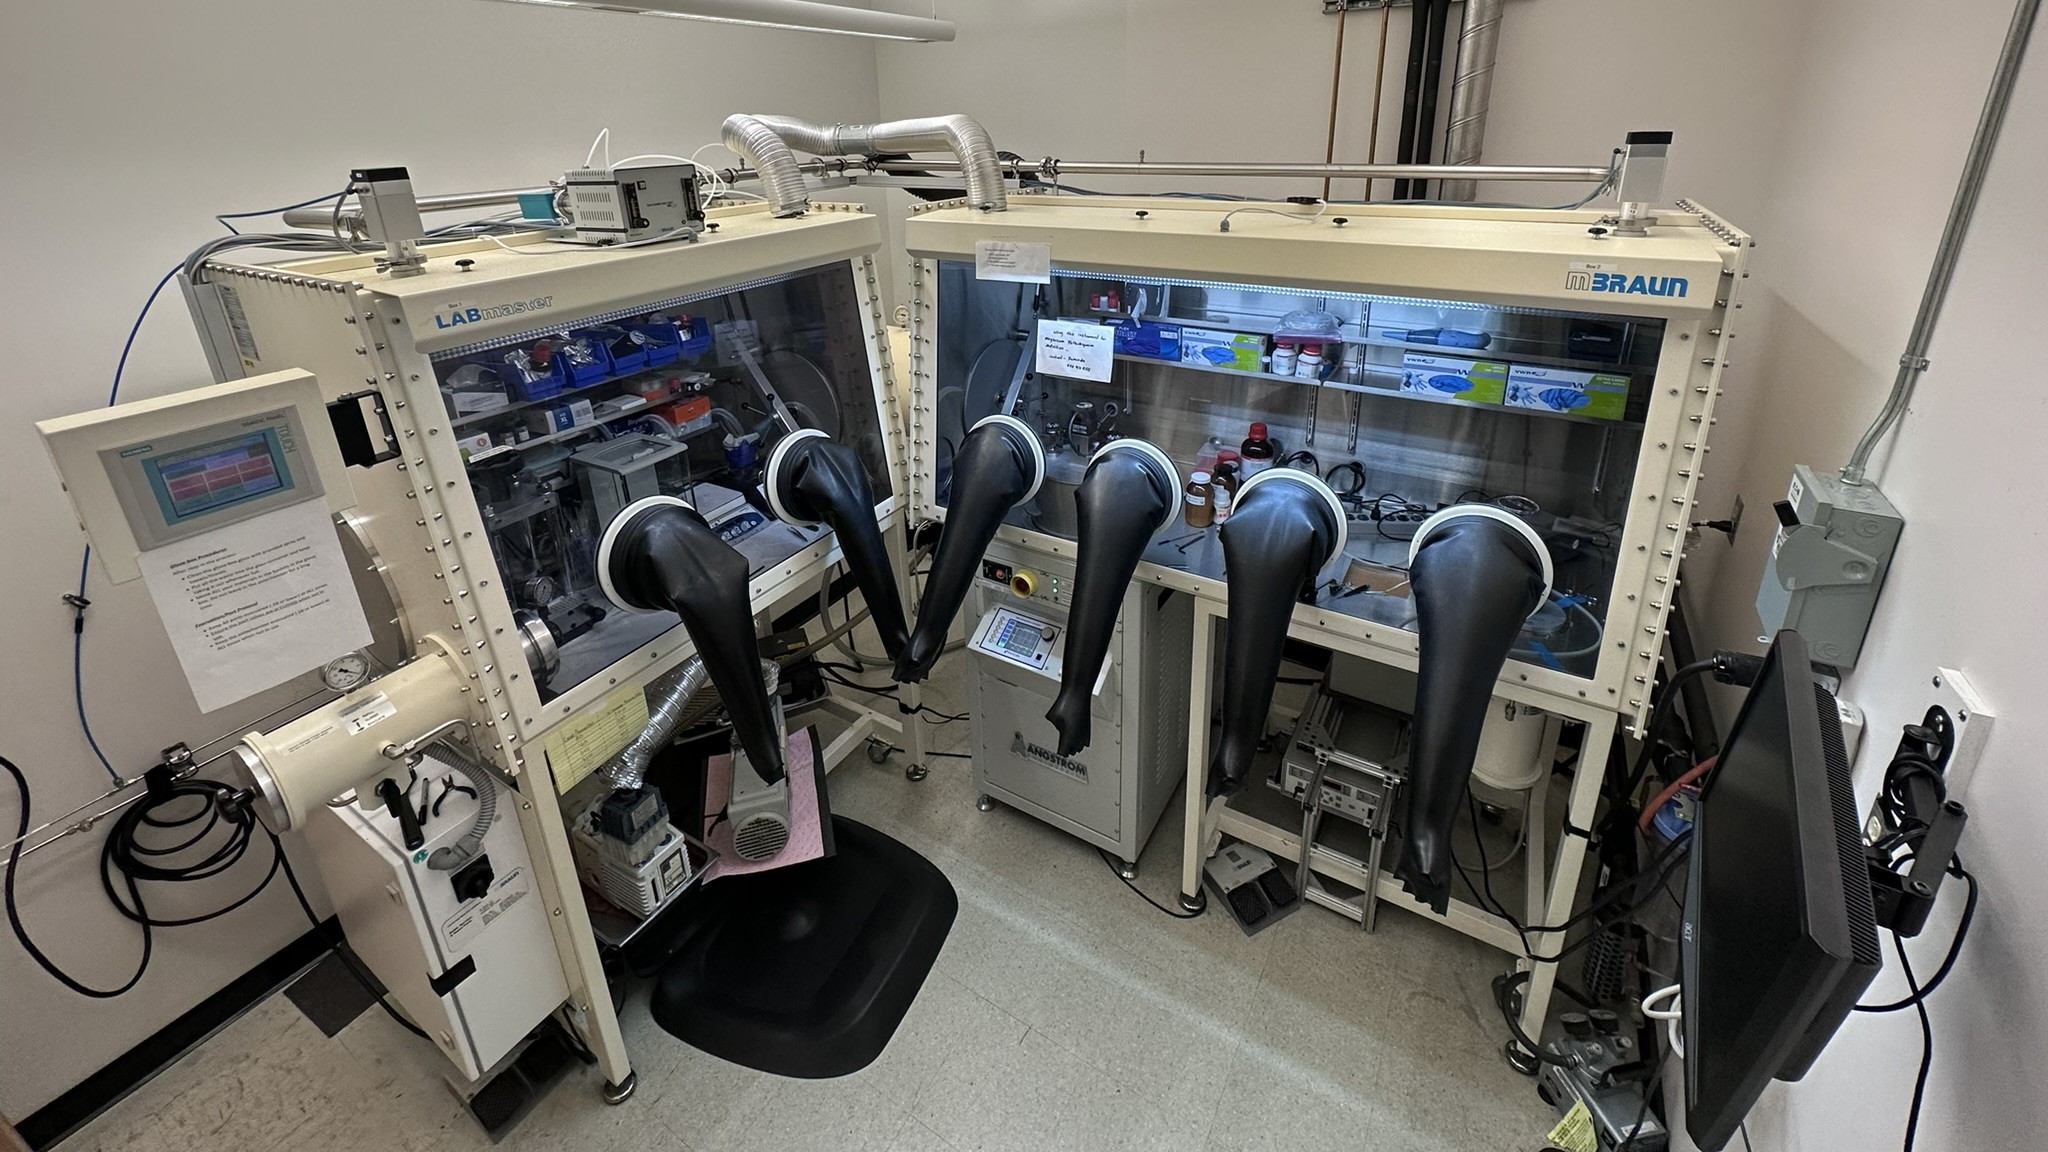 Overhead view of the gloveboxes in the Perovskite and Energy Sustainability Lab